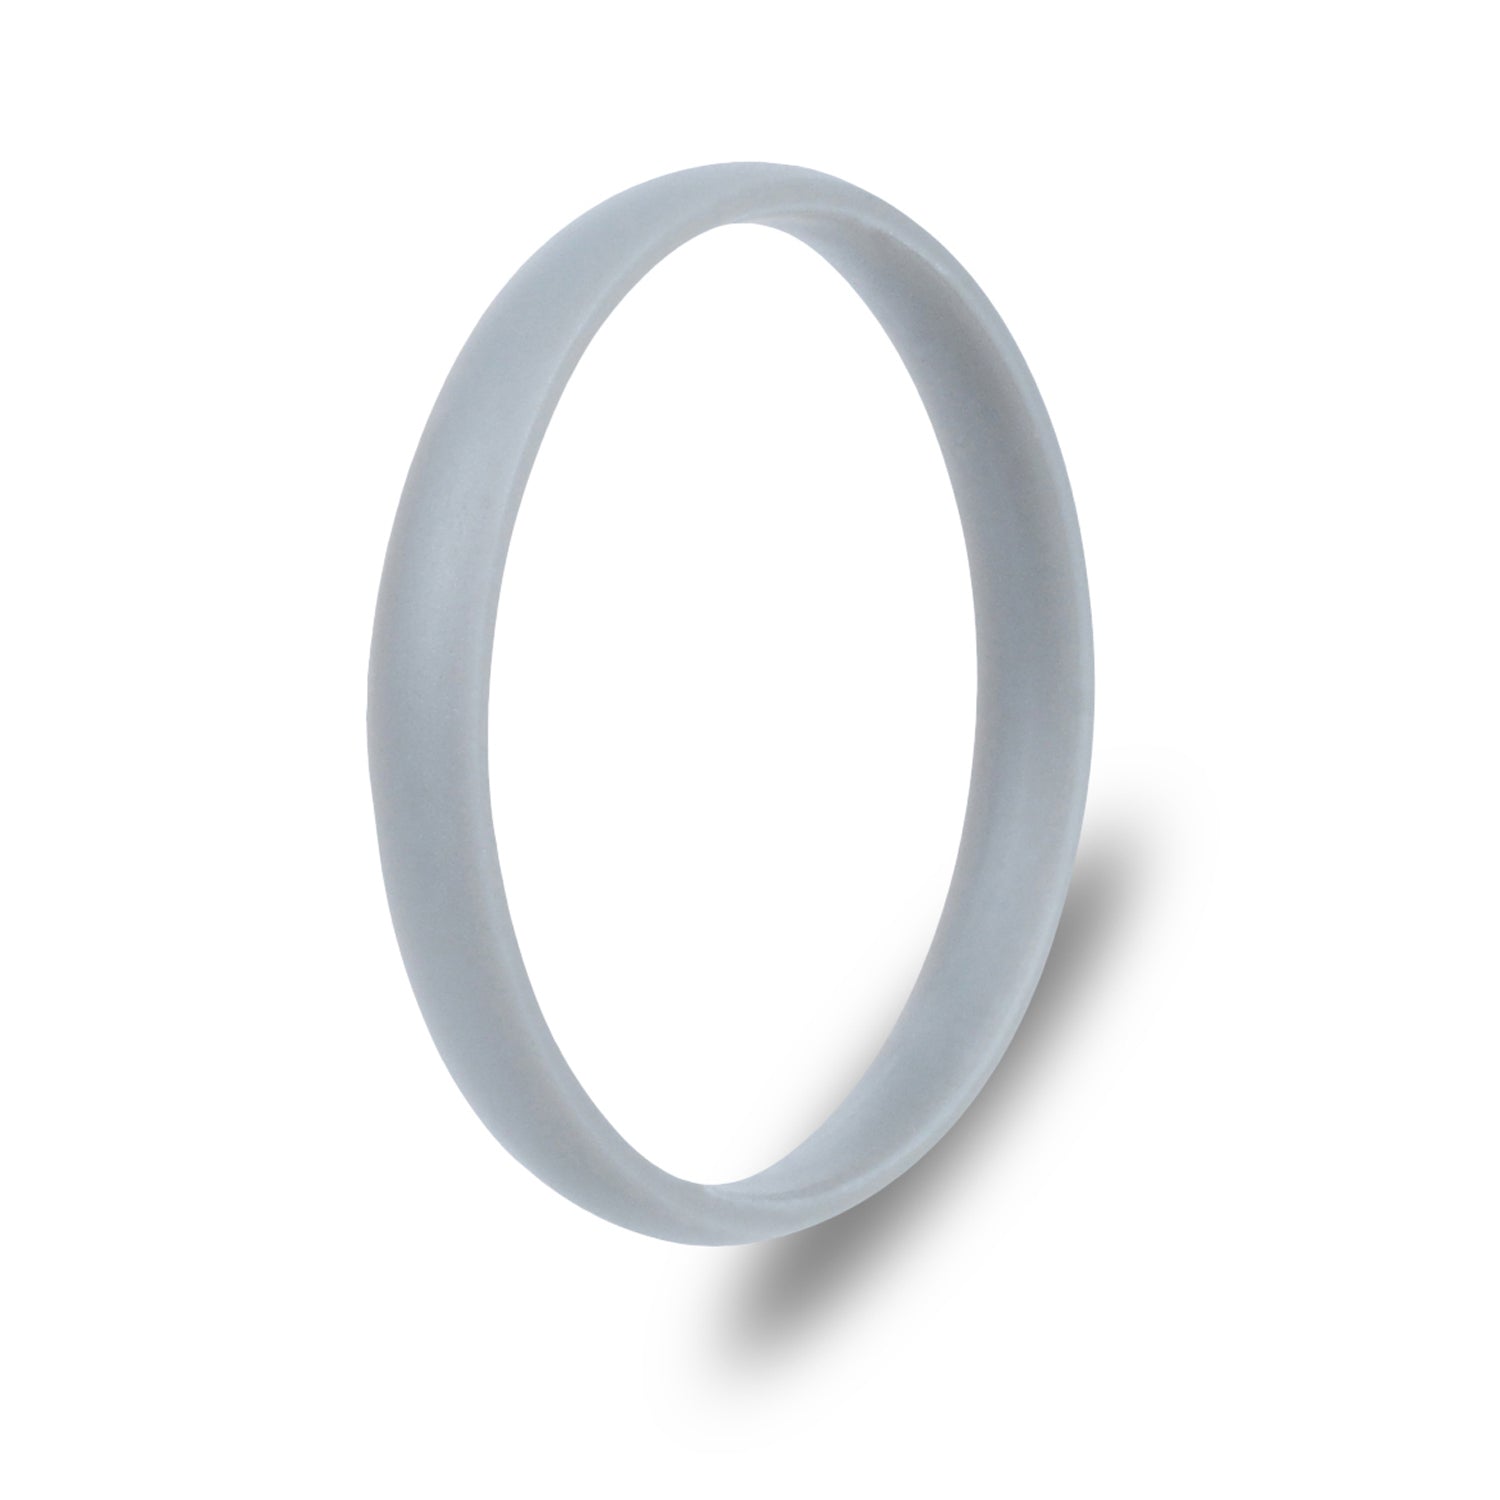 The Elise - Silicone Ring